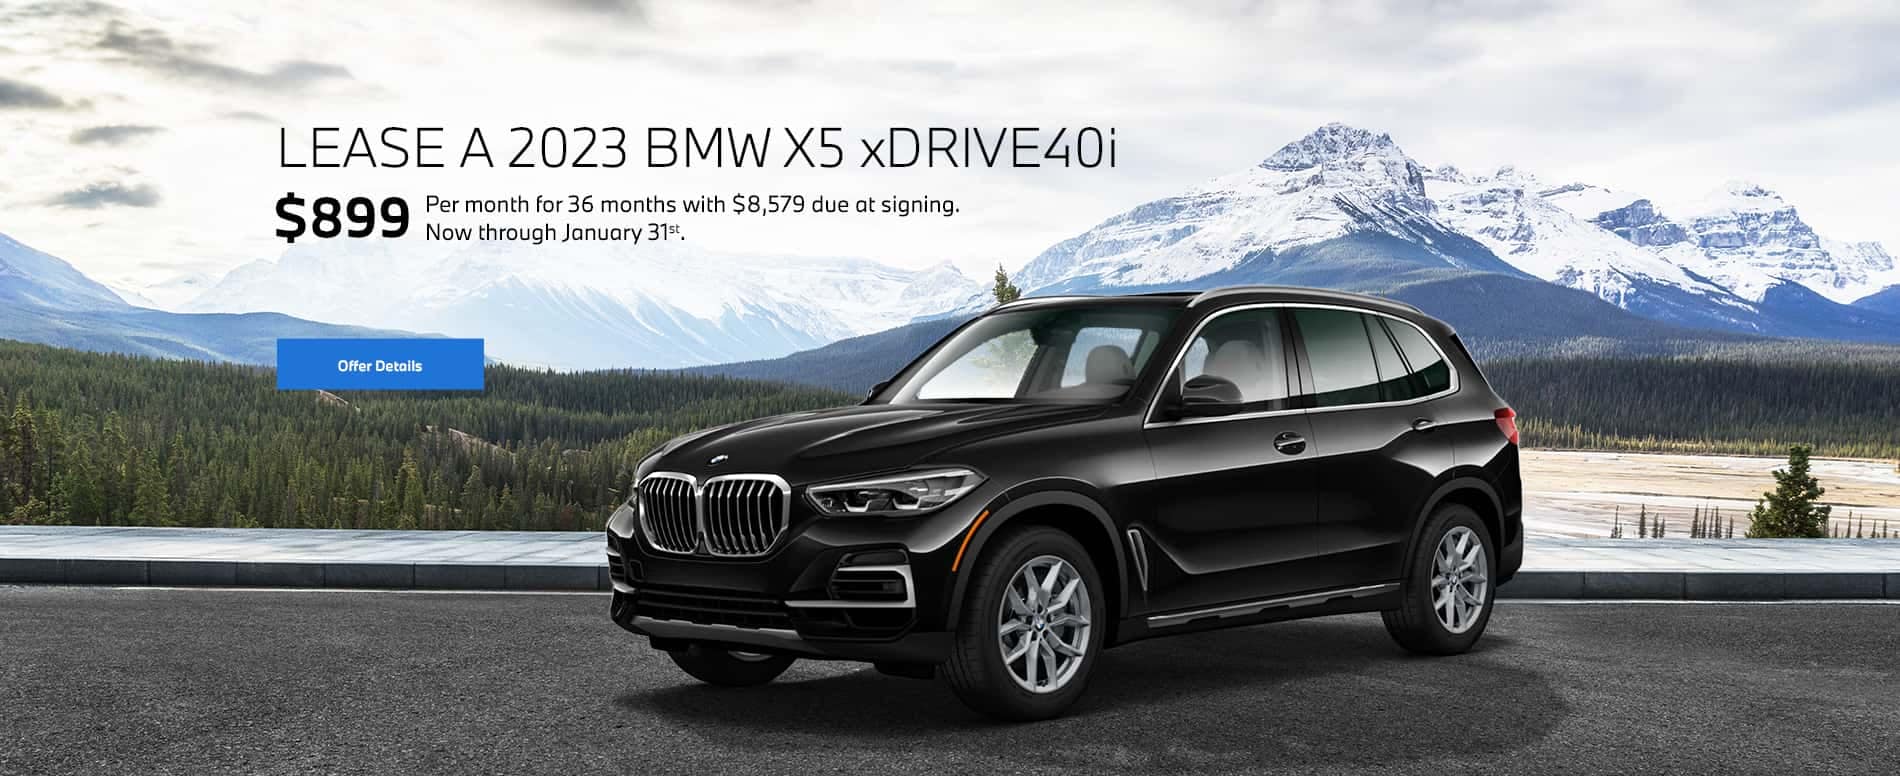 2023 X5 lease starting at $899 per month for 36 months